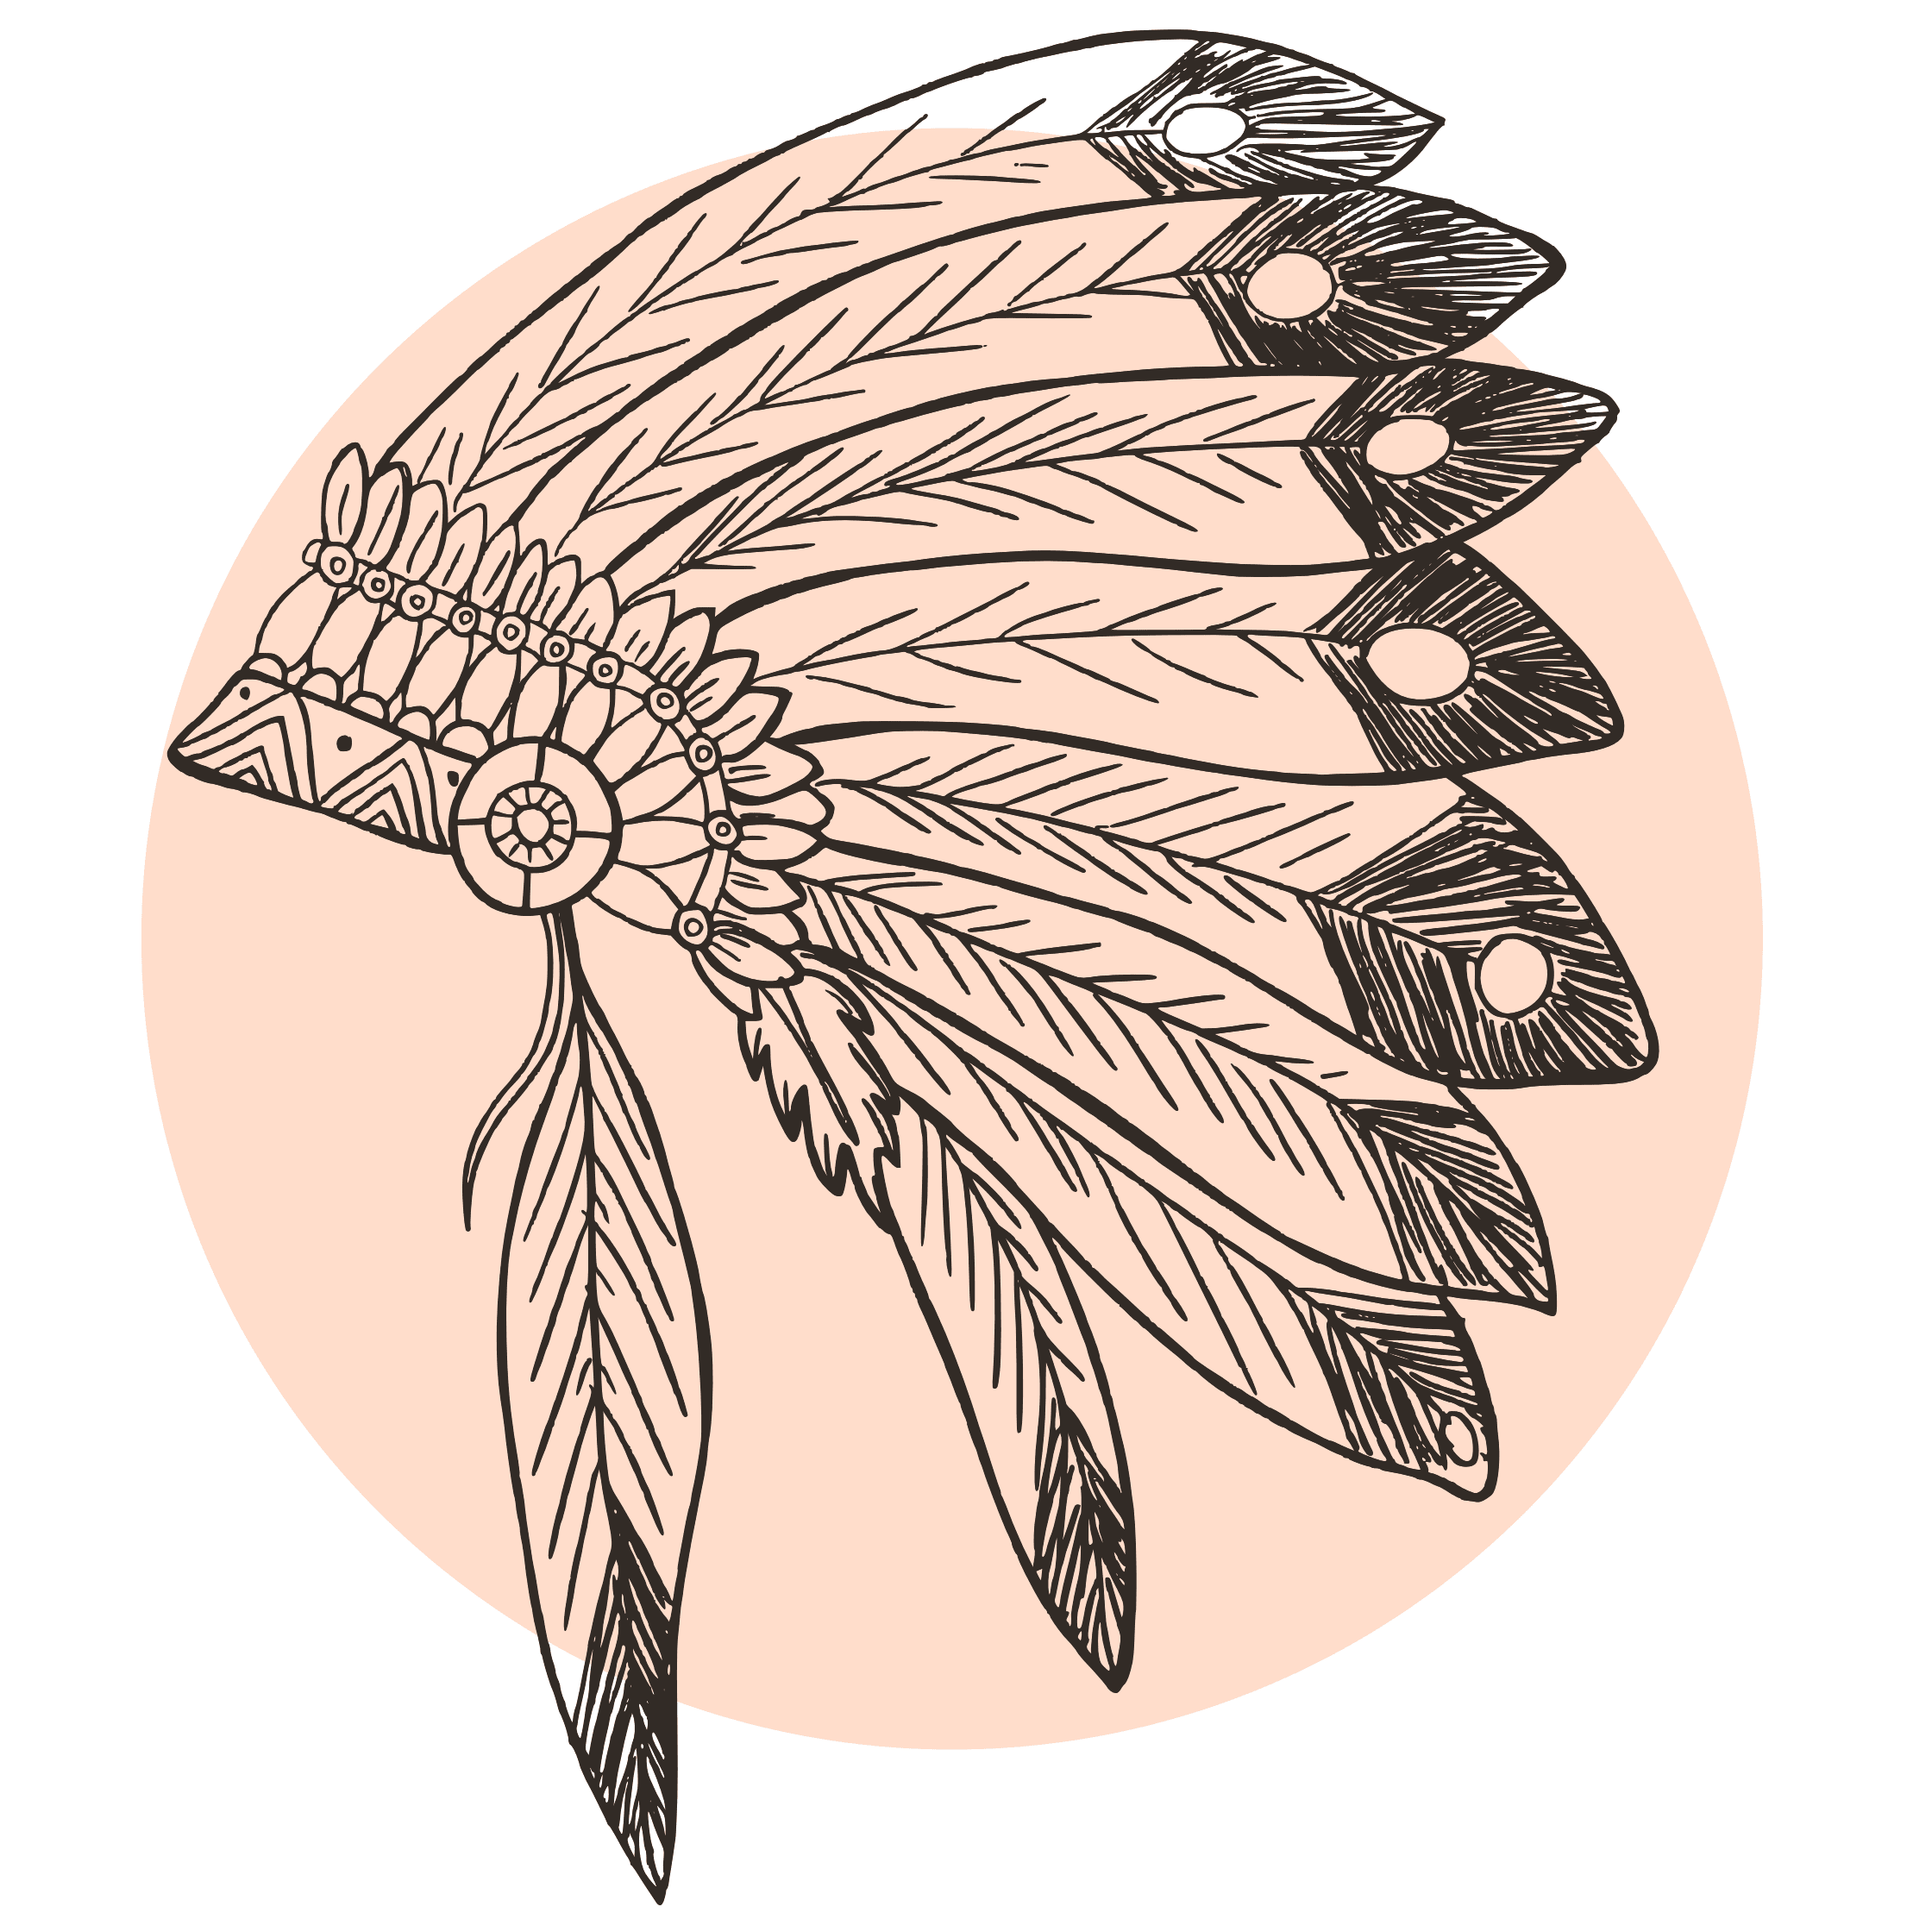 Illustration of a Native American ceremonial feathered bonnet